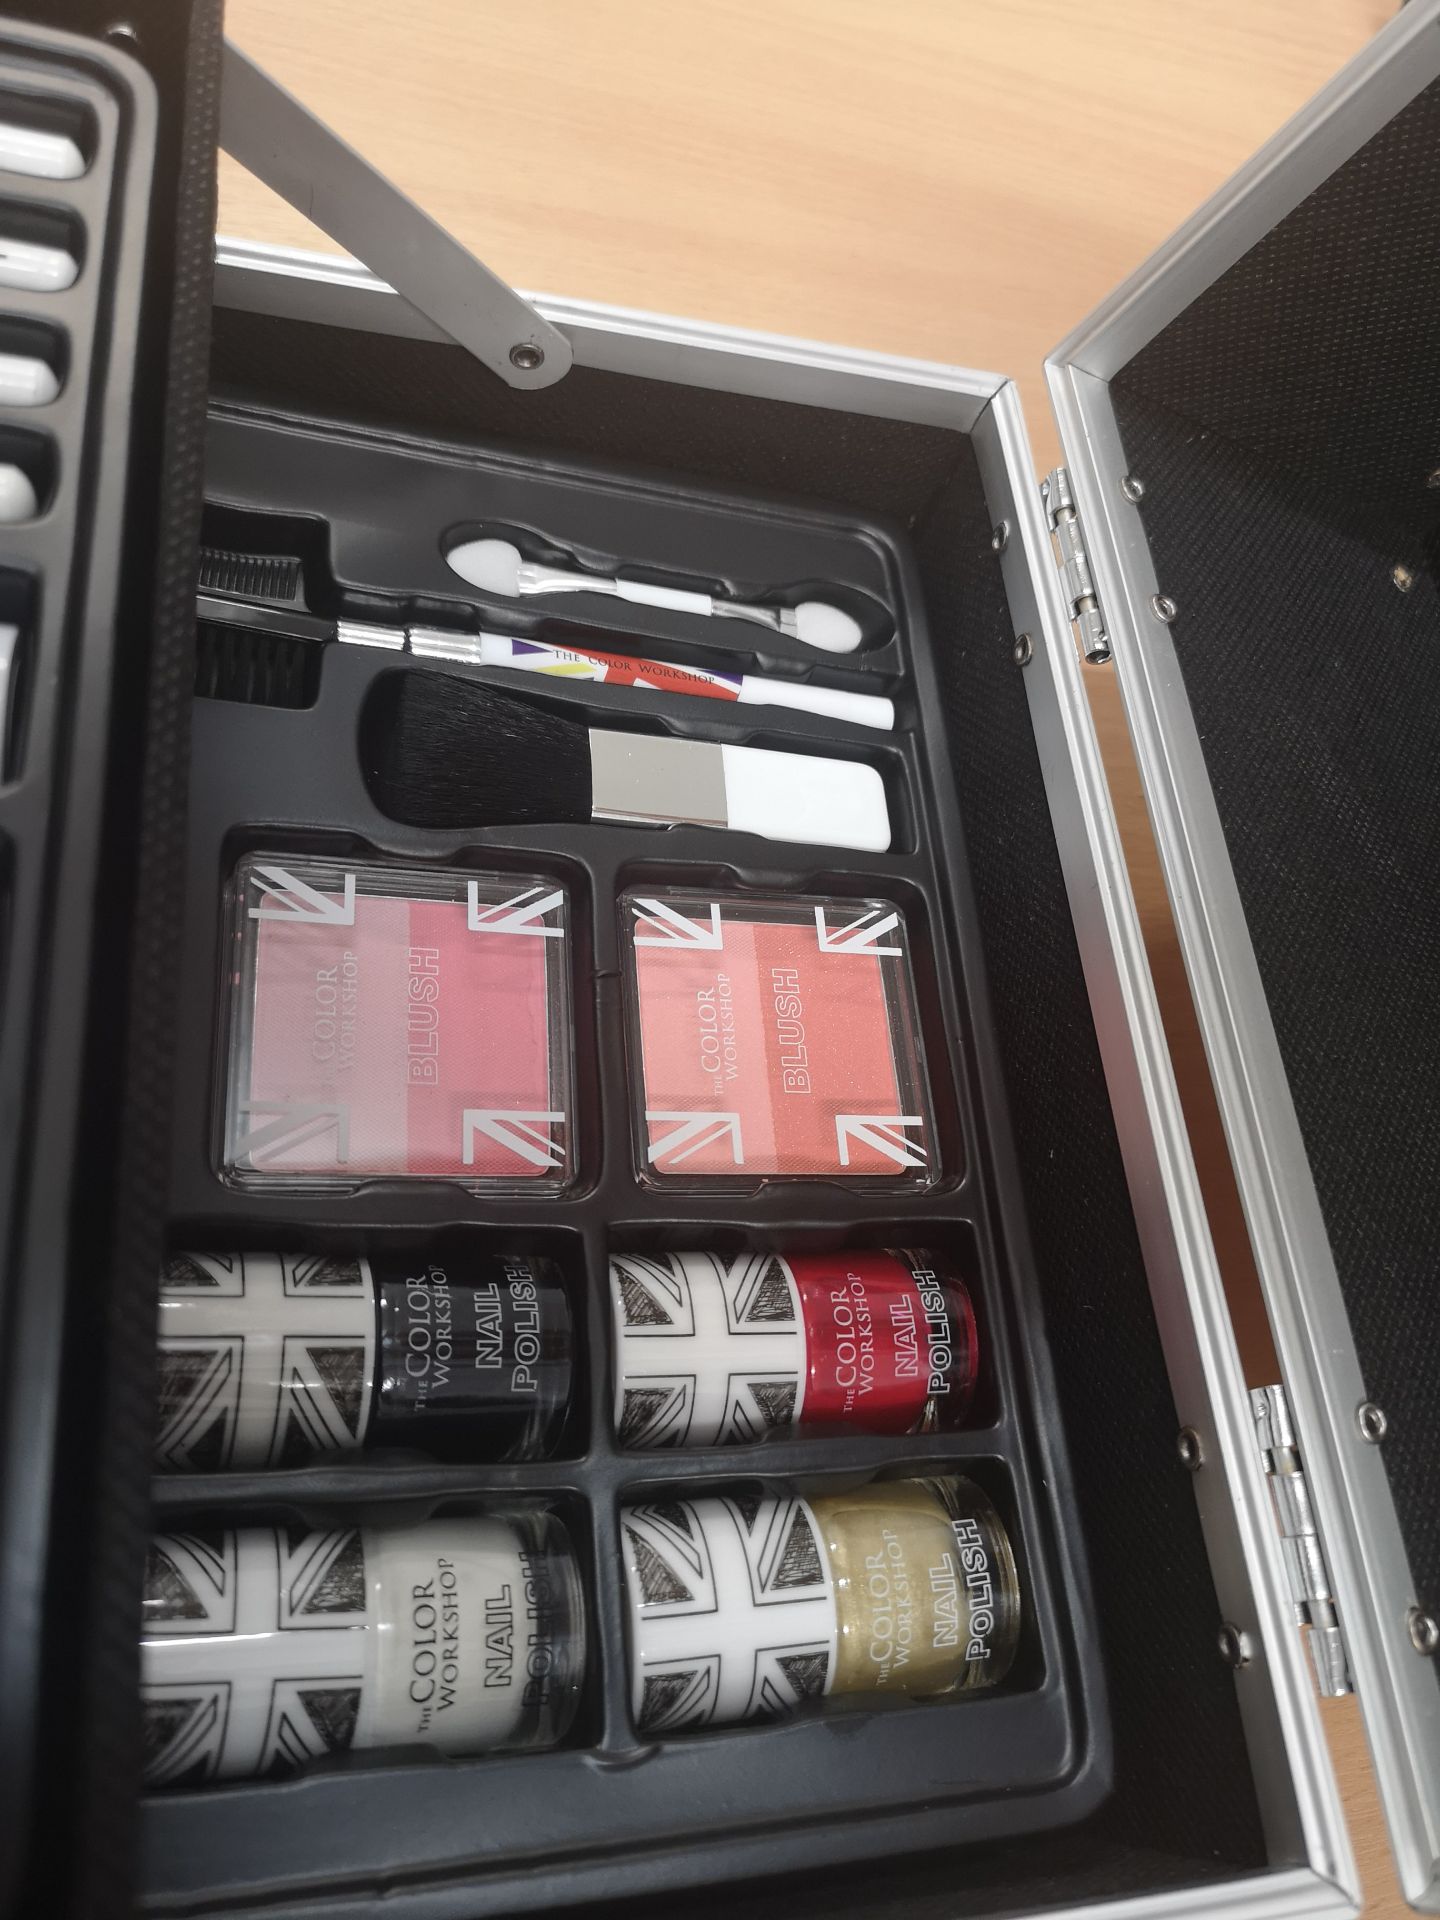 V Brand New 43 Piece Makeup Vanity Case By The Color Institute - Includes 20 Colour Eyeshadow - Image 5 of 5